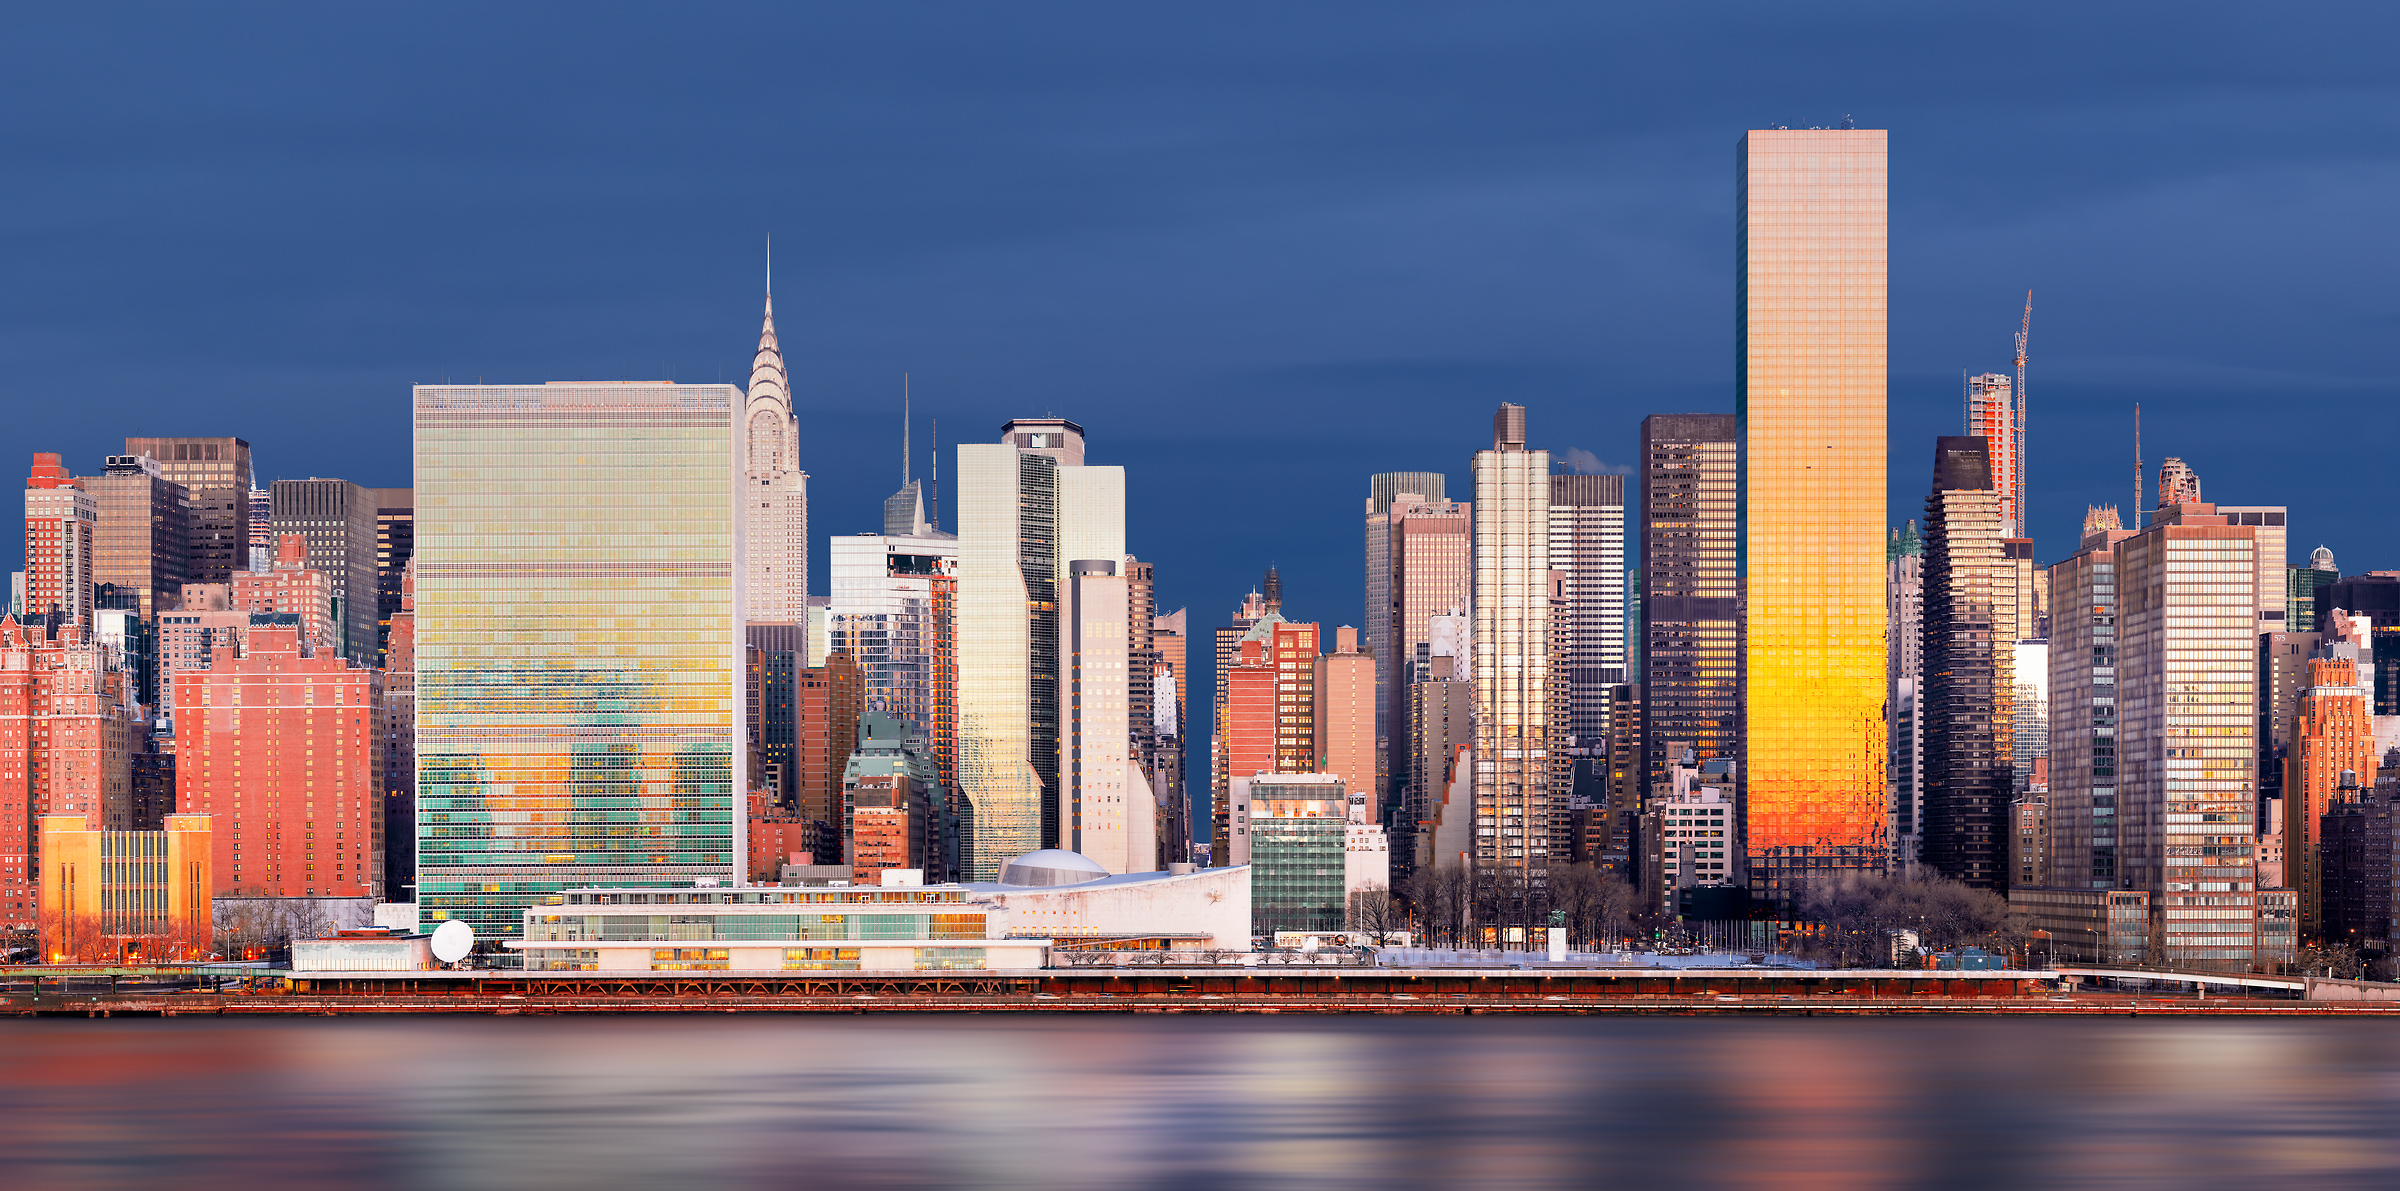 542 megapixels! A very high resolution, large-format VAST photo of the New York City skyline and buildings; gigapixel photograph created by Dan Piech in Manhattan